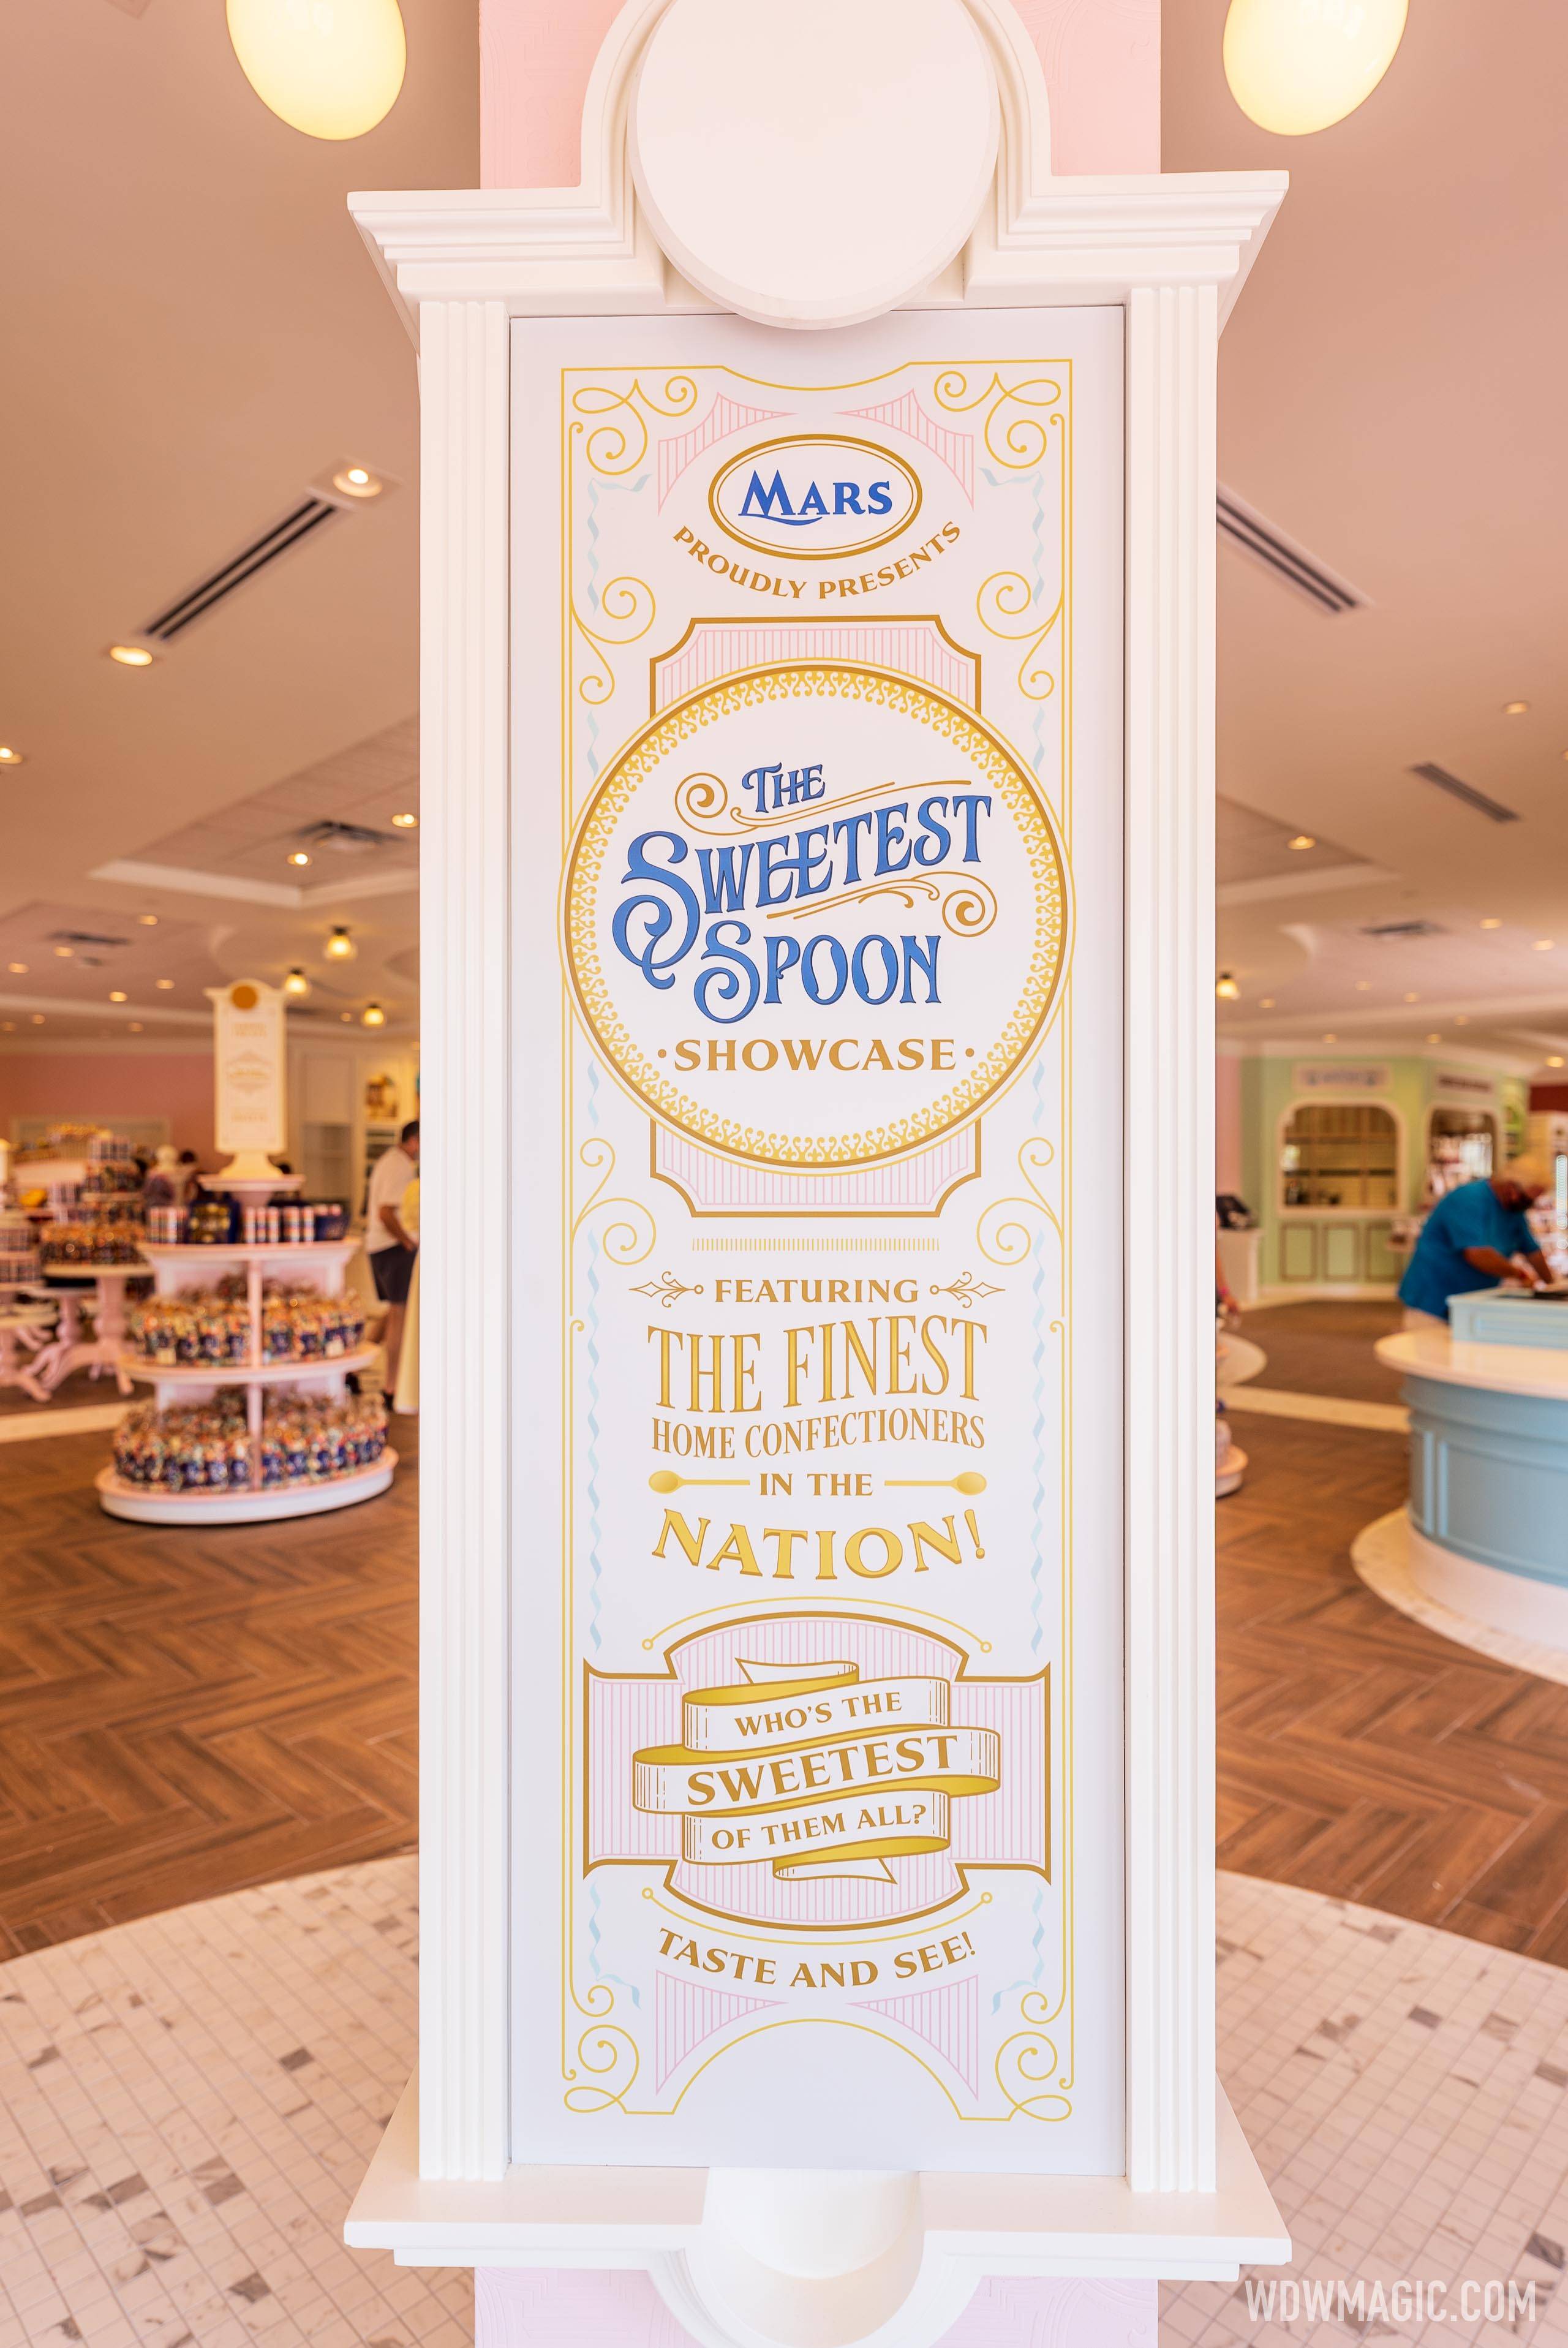 Inside the new Main Street Confectionery store at Magic Kingdom